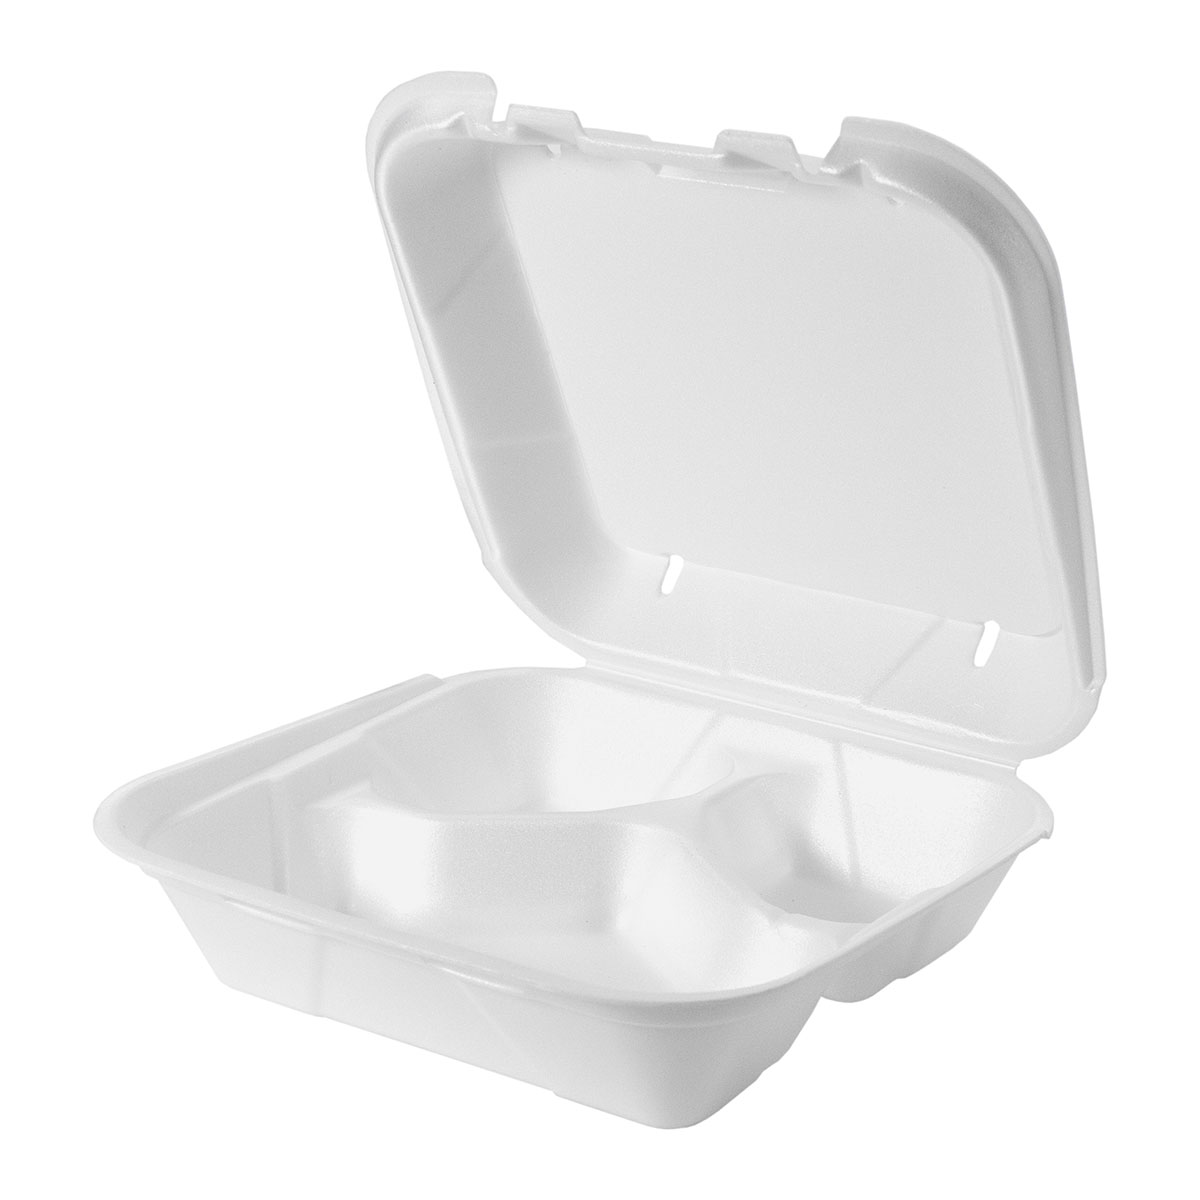 White 8" x 8" Three-Compartment Snap It Lock Vented Hinged Square Container